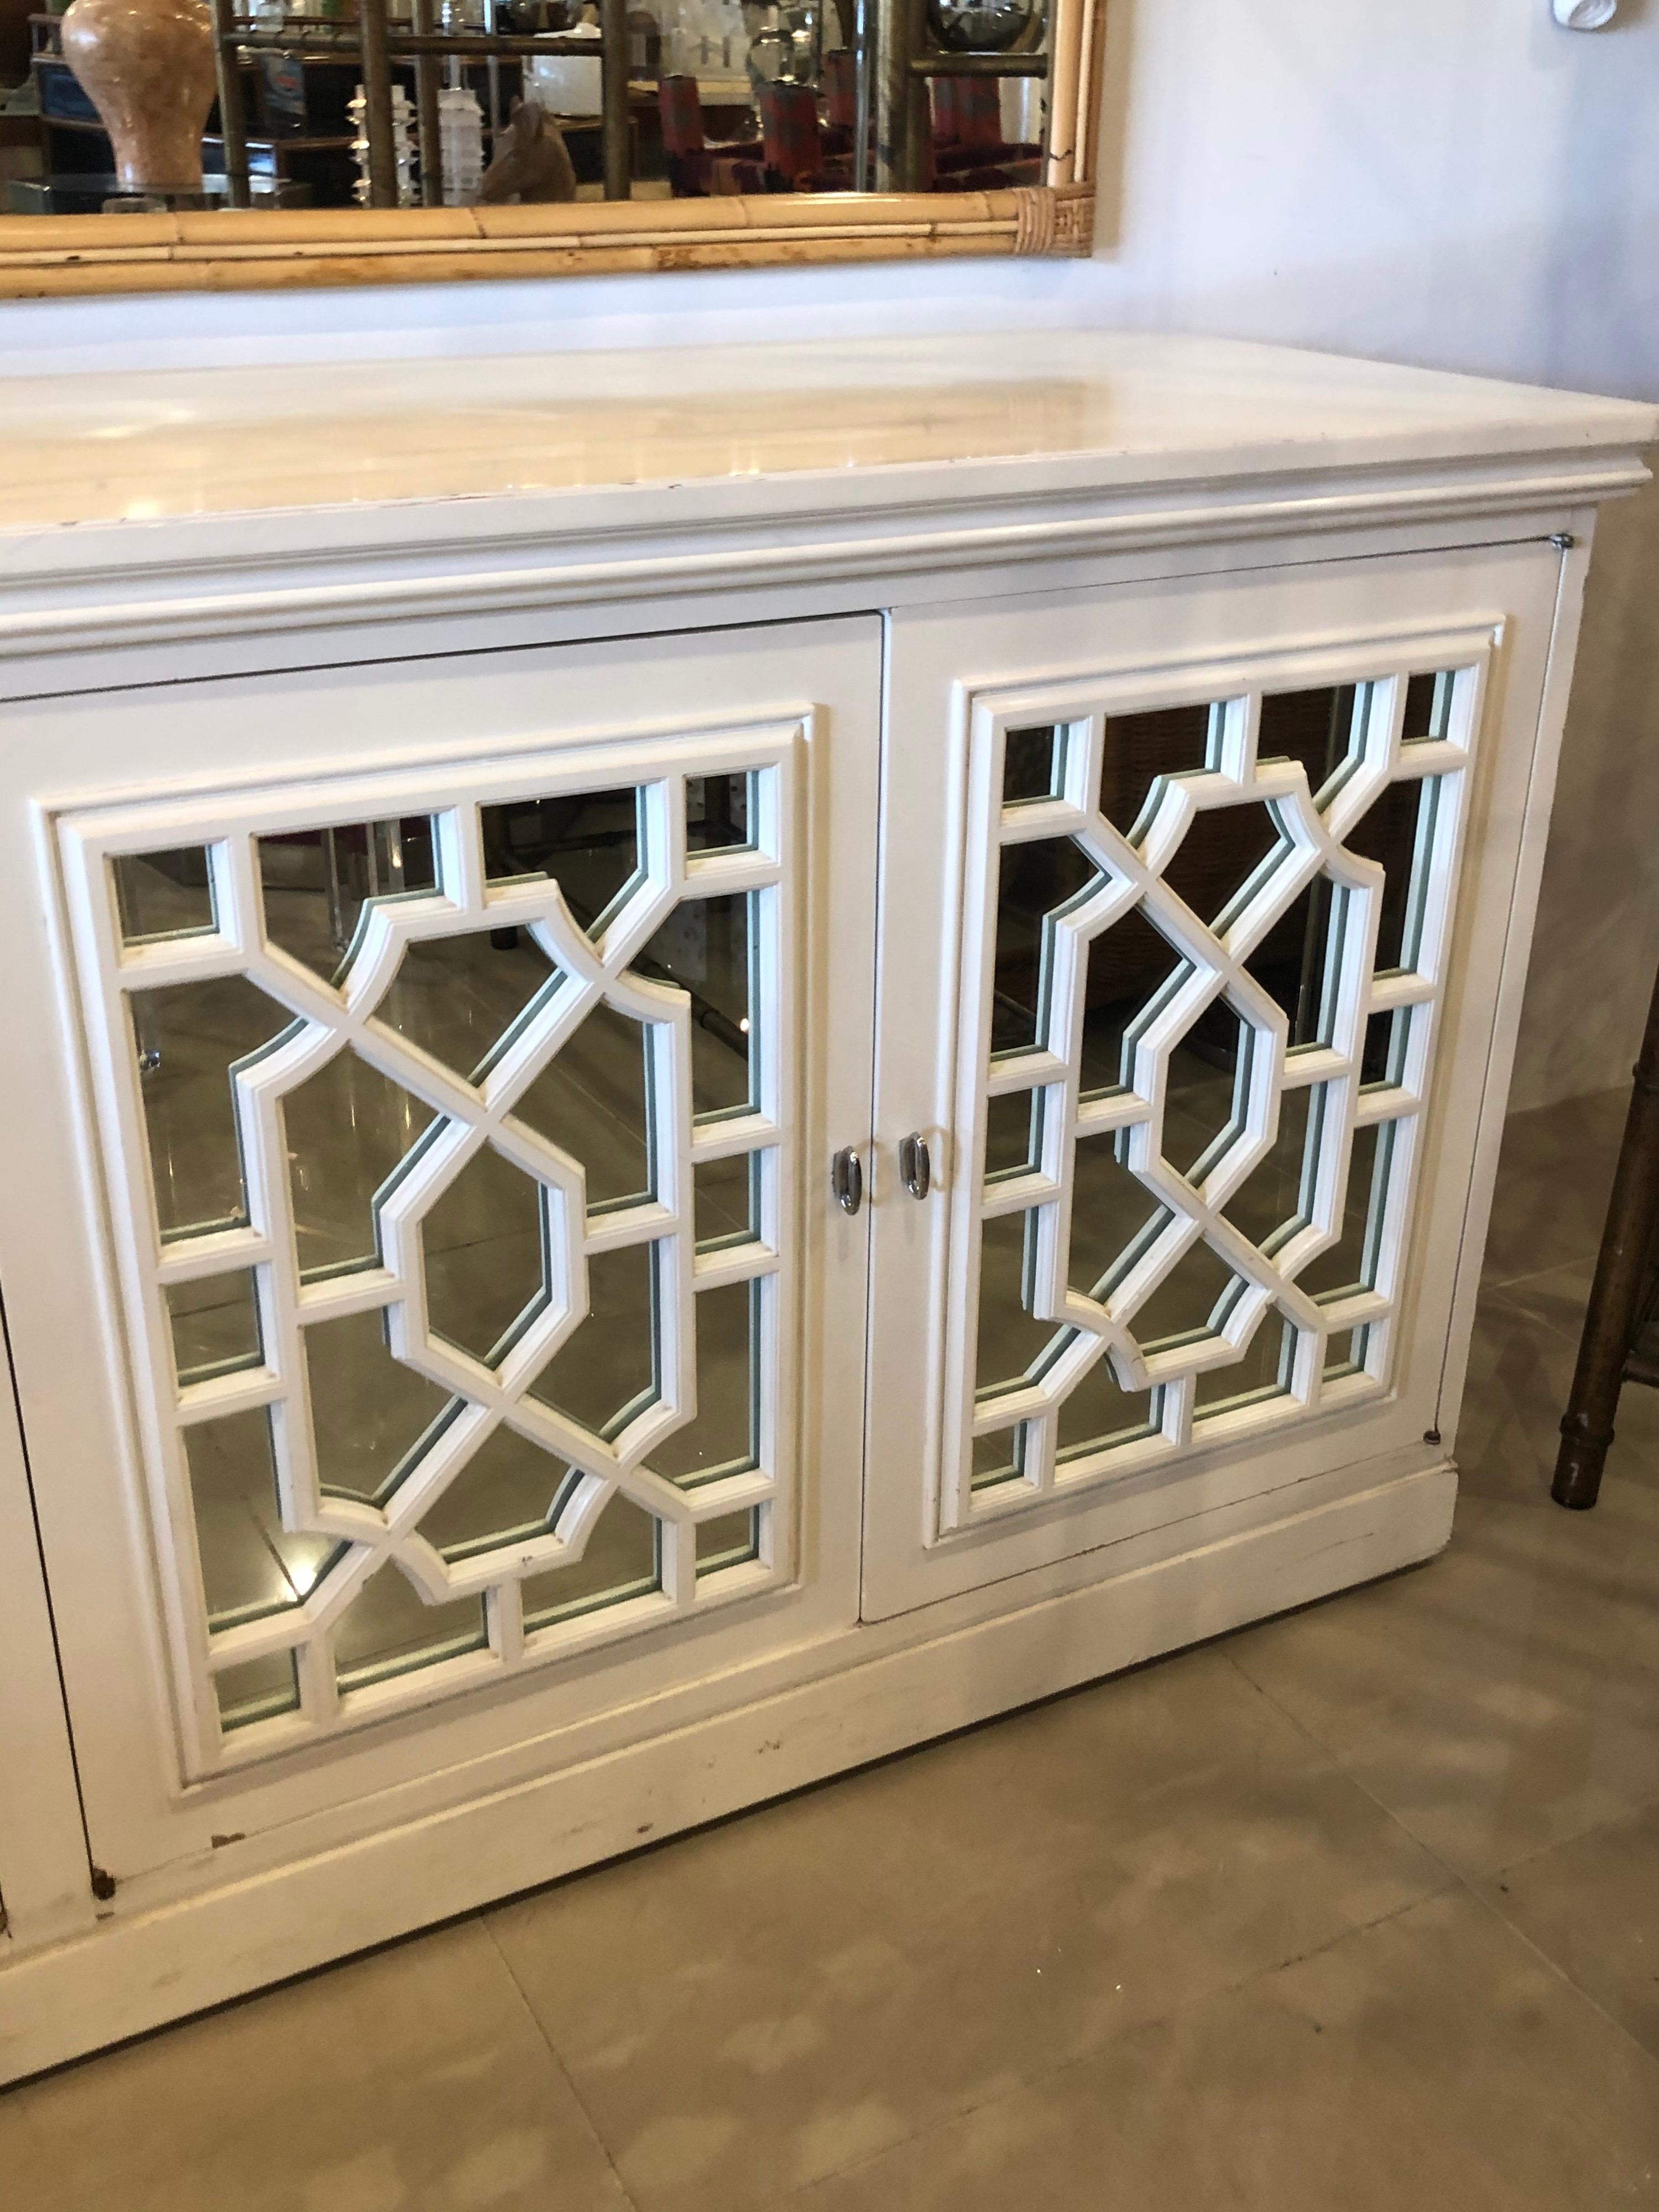 Late 20th Century Vintage Fretwork Fret Chinese Chippendale Mirrored Cabinet Credenza Sideboard